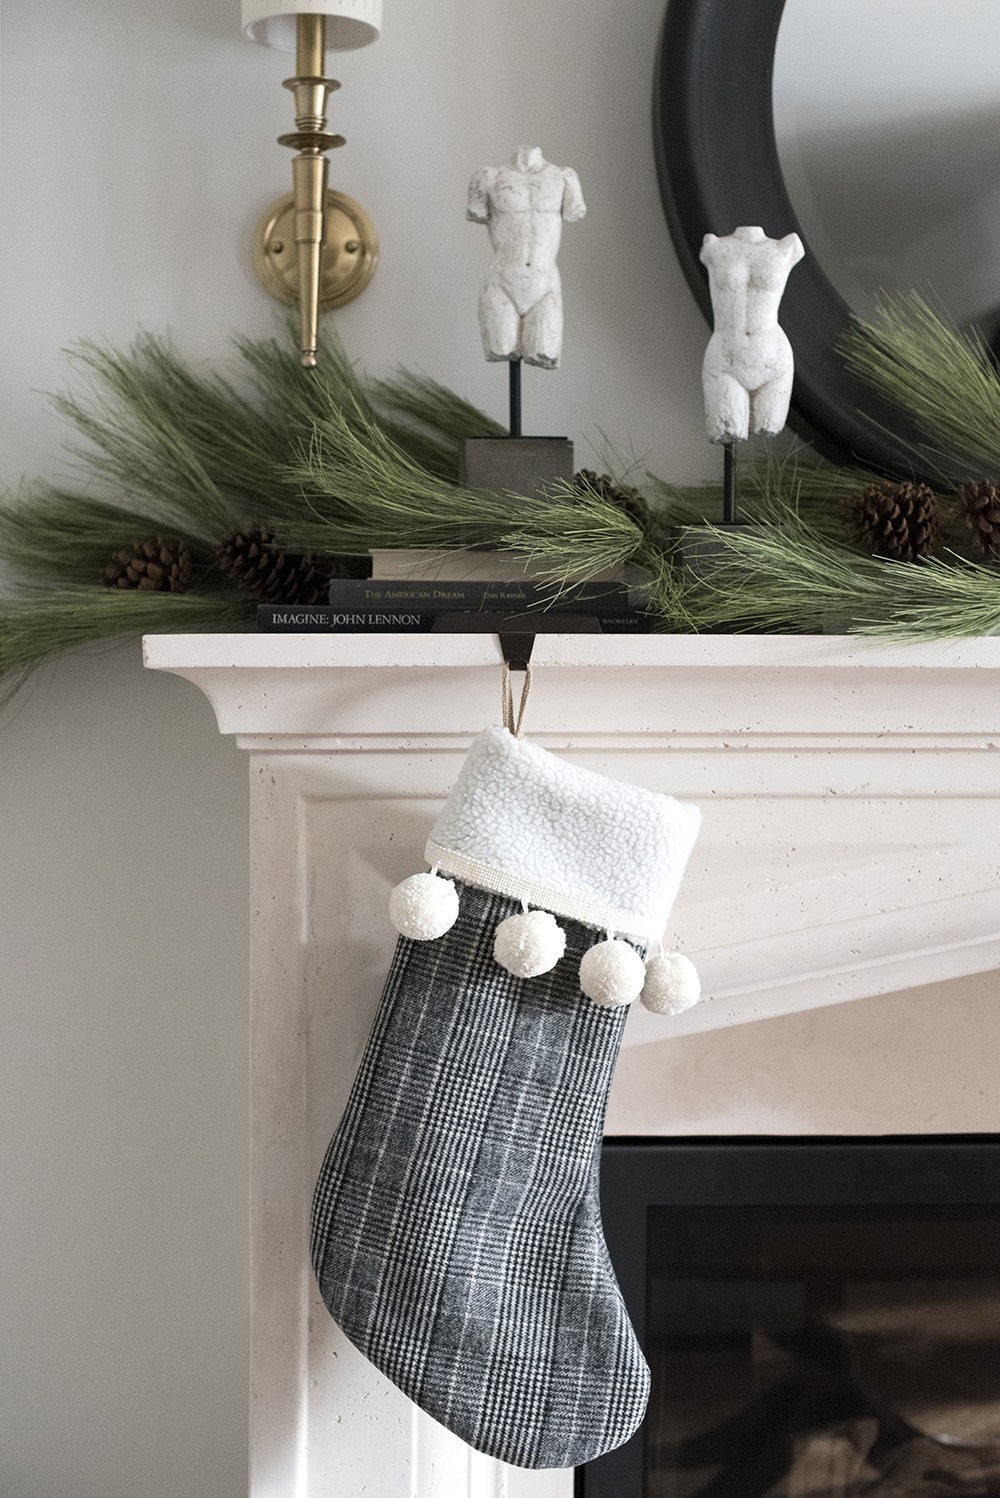 10 Holiday Posts To Inspire & Bring Cheer (...A Bit Early) - roomfortuesday.com